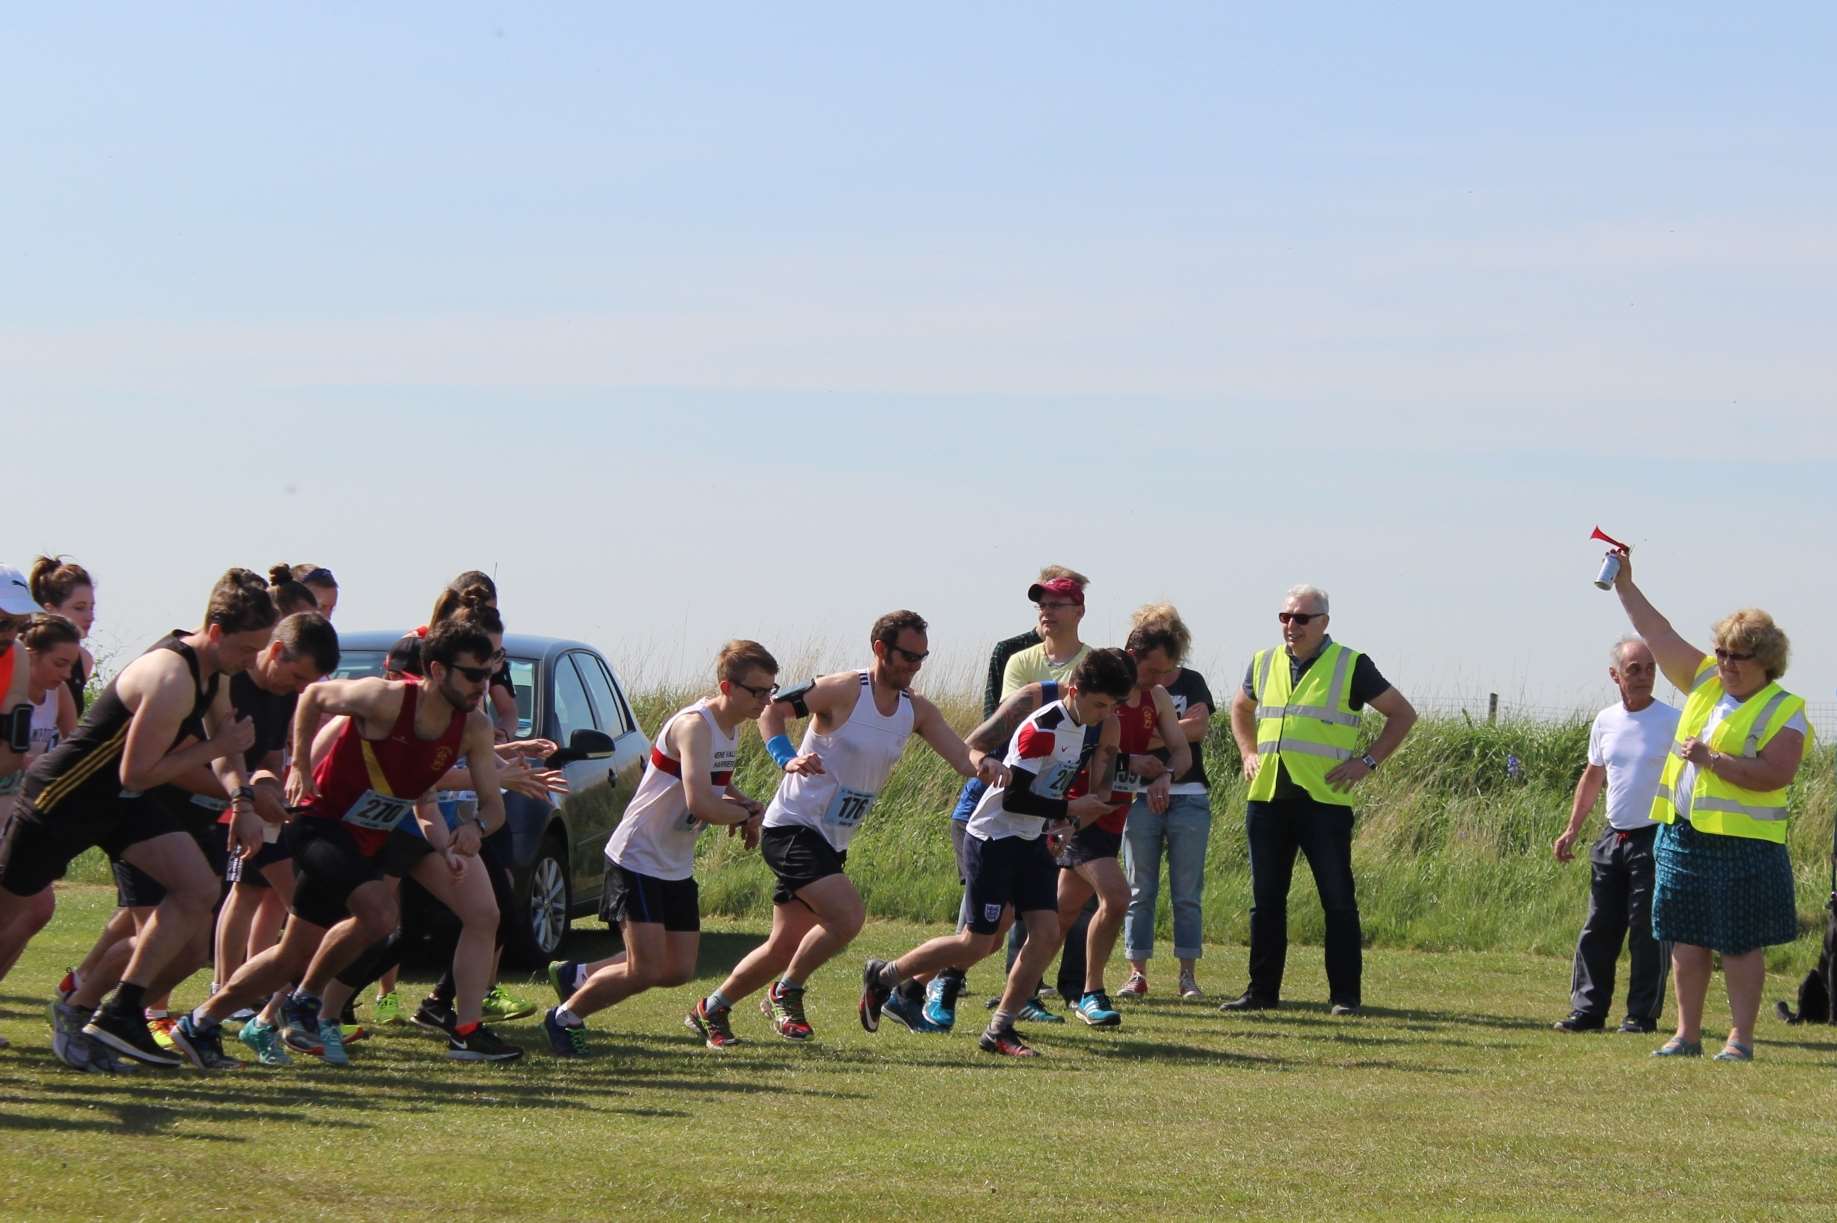 They're off! Fiona Trigwell starts the 10-mile Paul Trigwell Isle of Sheppey Run